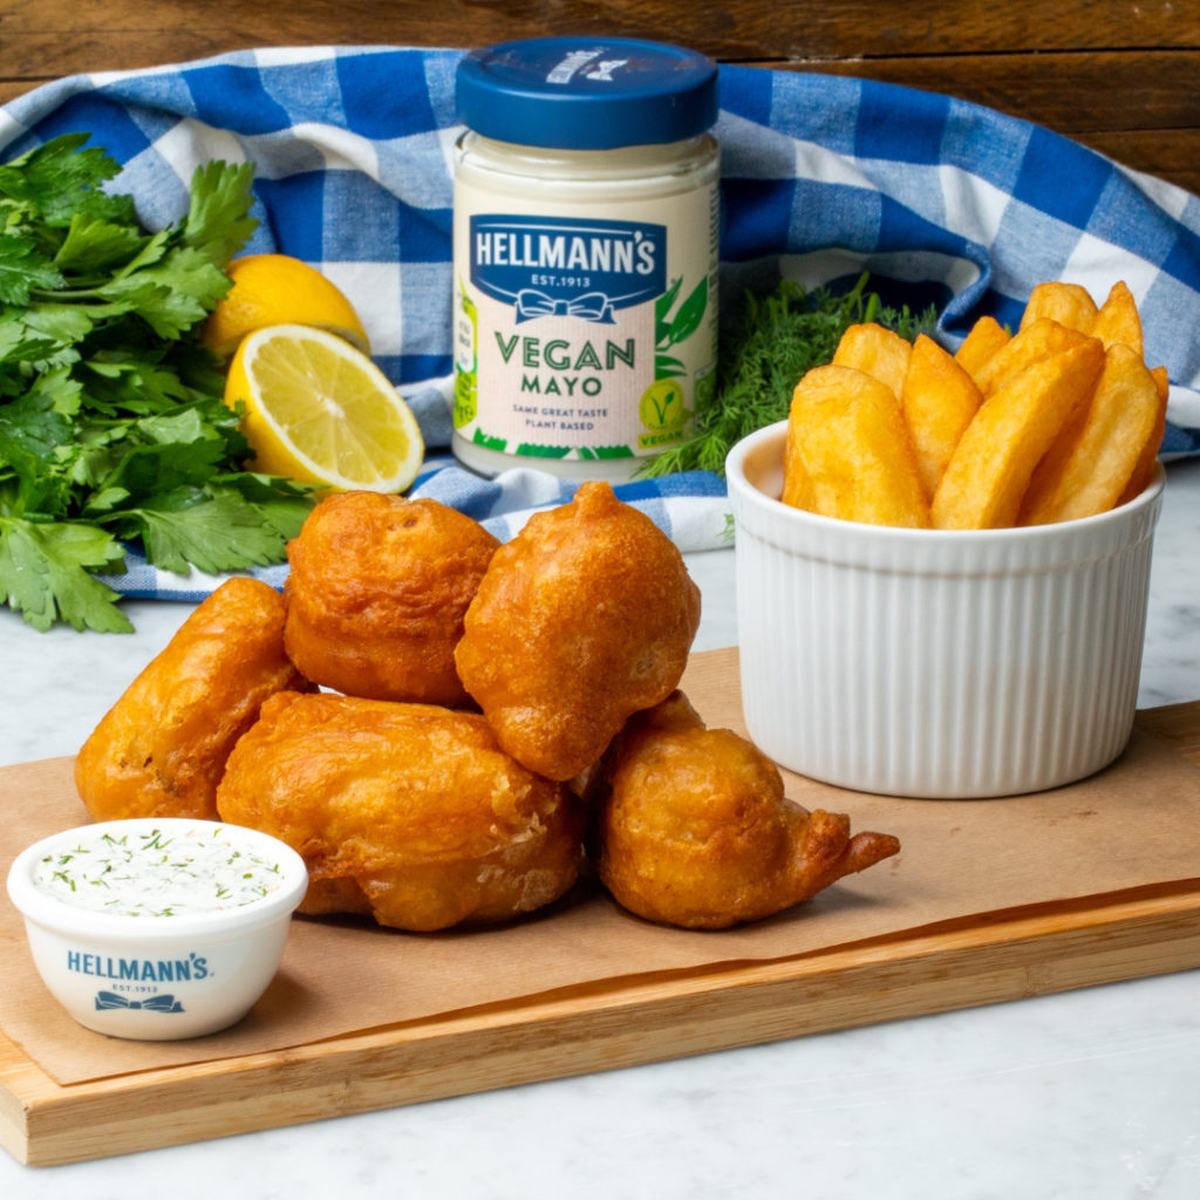 Hellmann's Vegan Mayo 'Fish' and Chips Recipe | Twisted